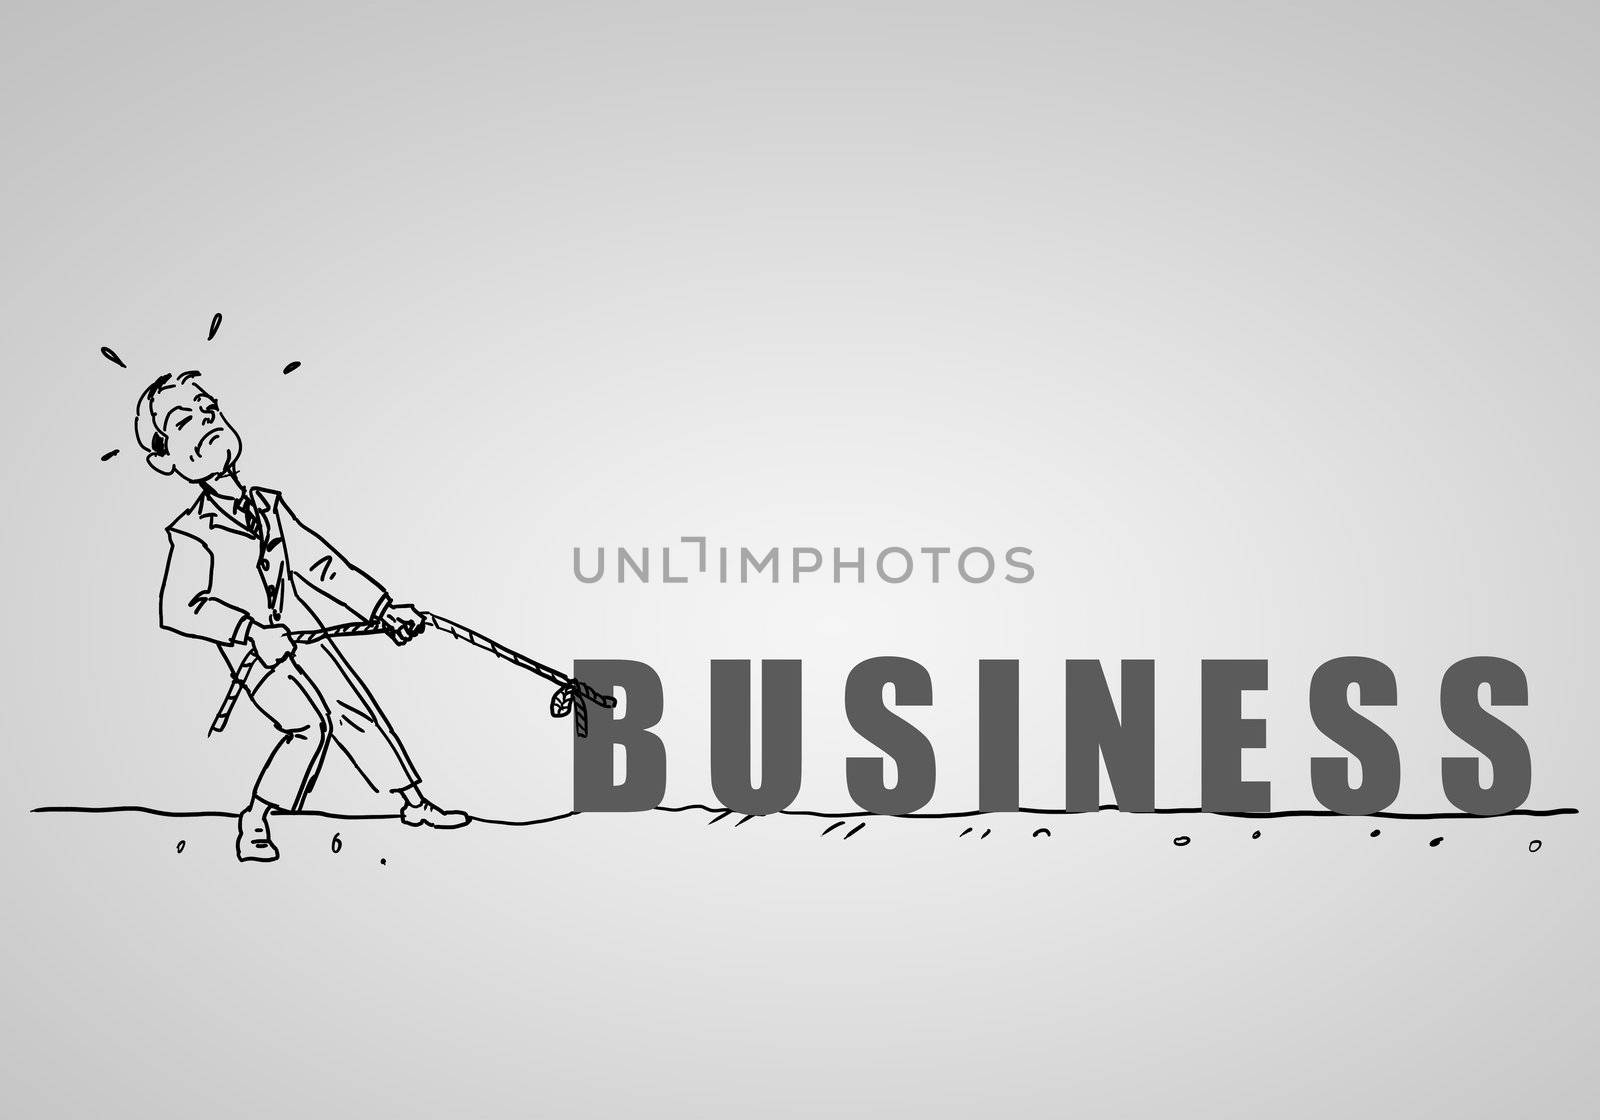 Drawing of a businessman and letters of the word business